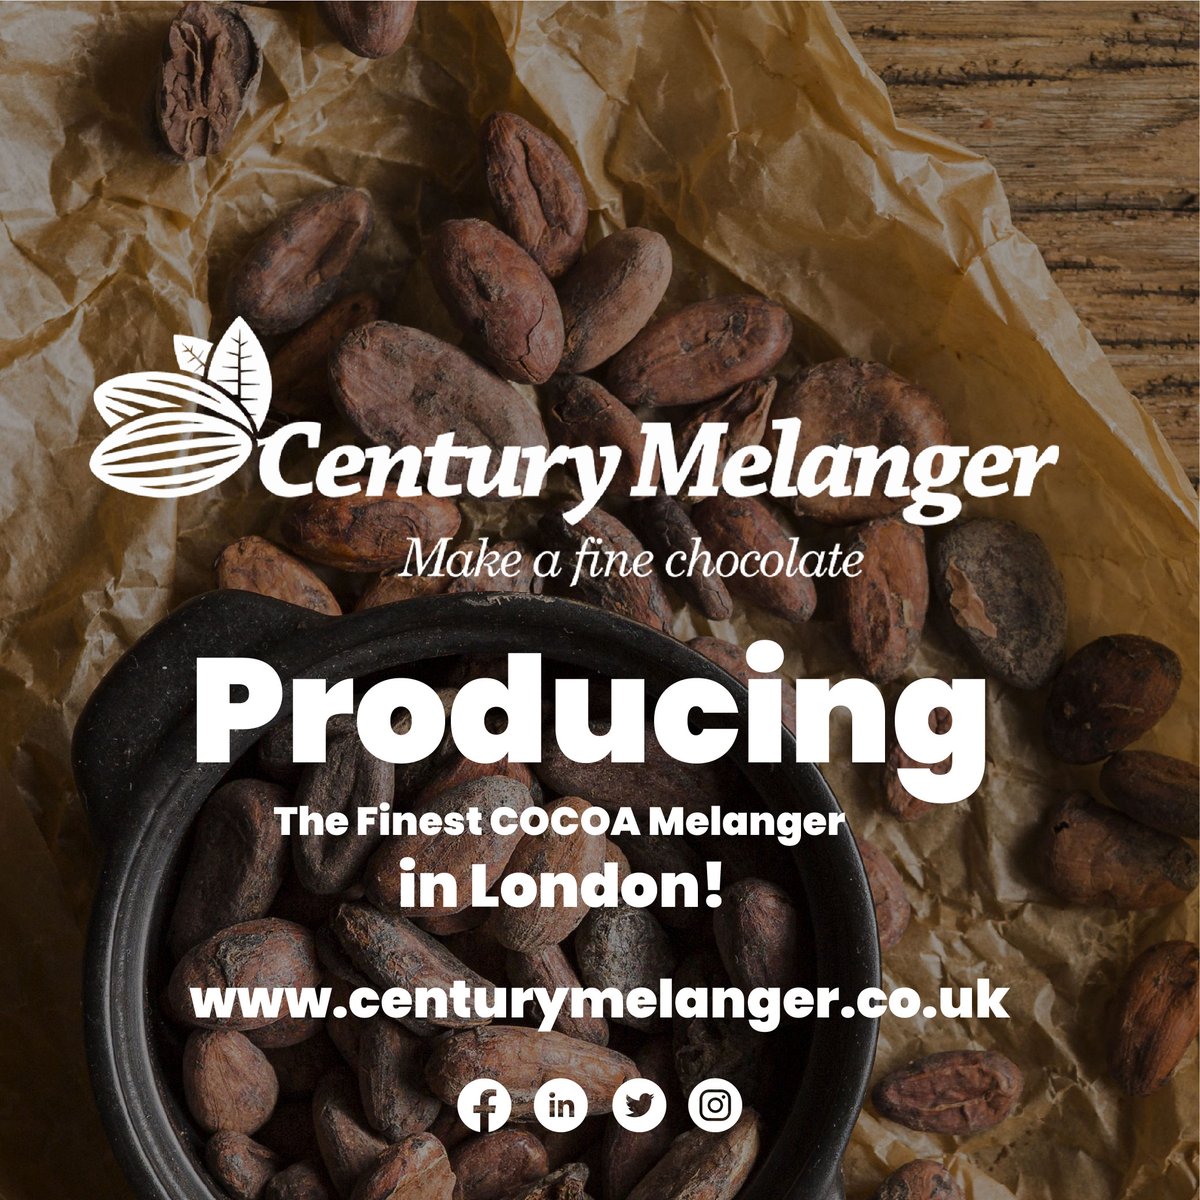 Chocolate processing equipment at Century melanger ensures the world's fastest shipping and we serve across 23 countries at a competitive price. #centurymelanger #chocolatemelangerforsale #cocoawinnower #cocoabeancracker #chocolatemakingmachines #cacaogrinder #minimelanger #uk